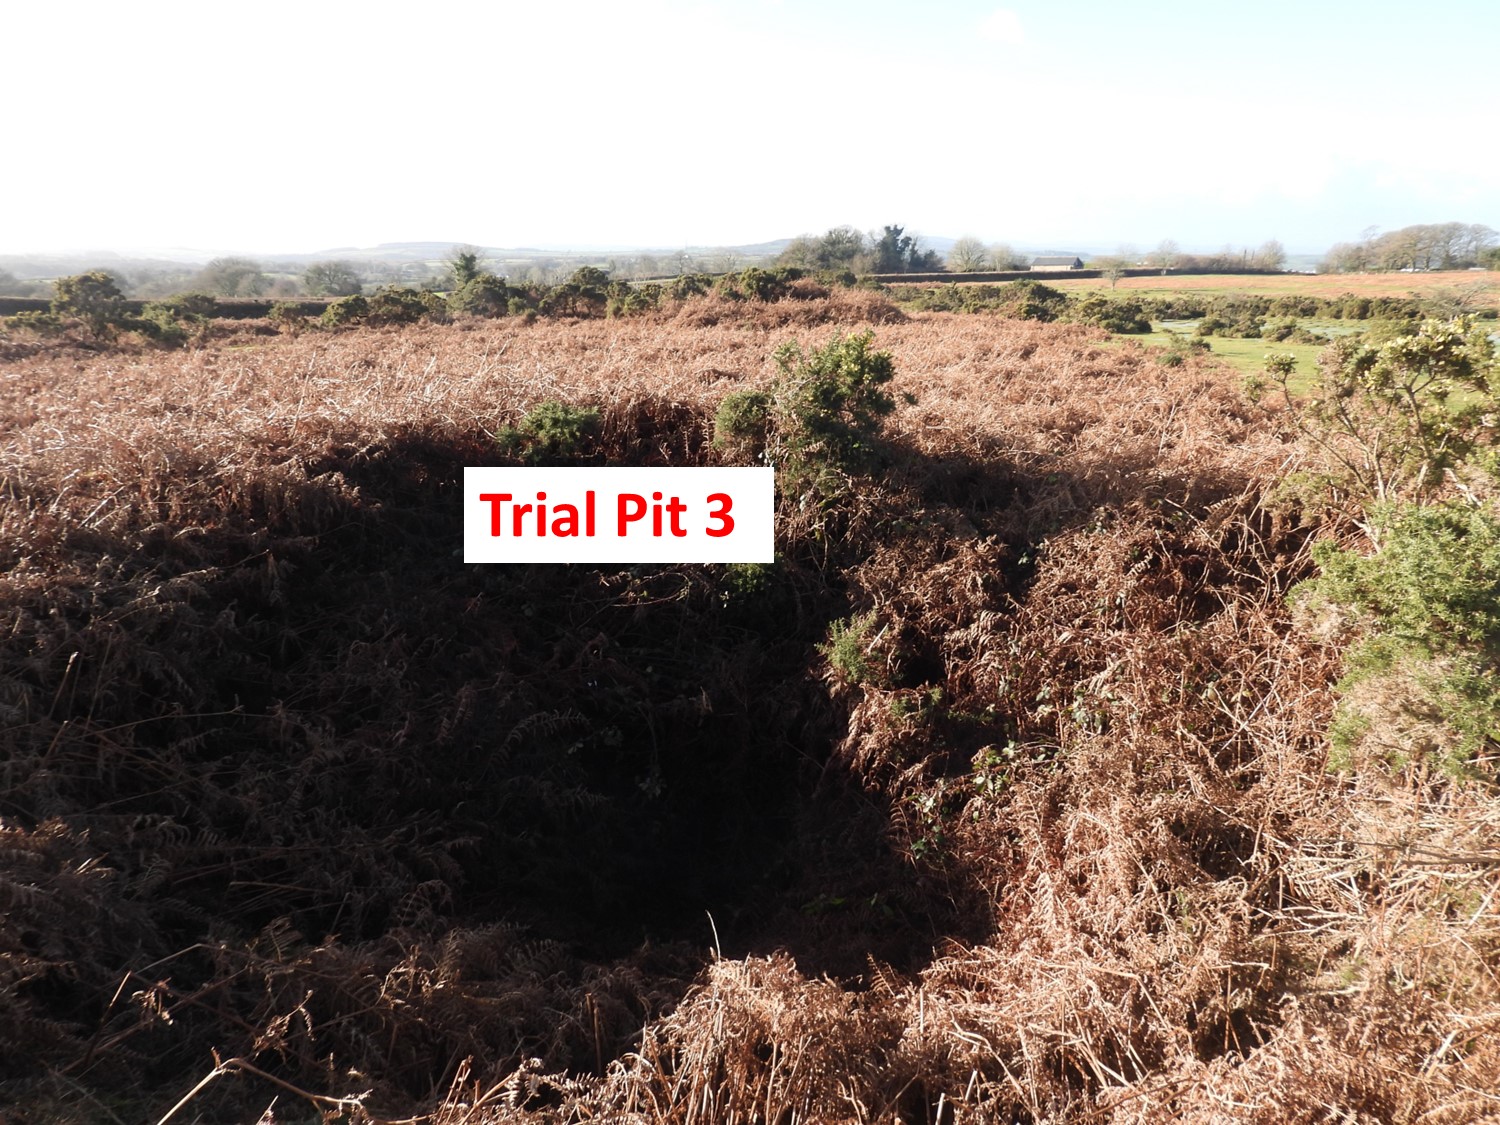 8. Trial Pit 3